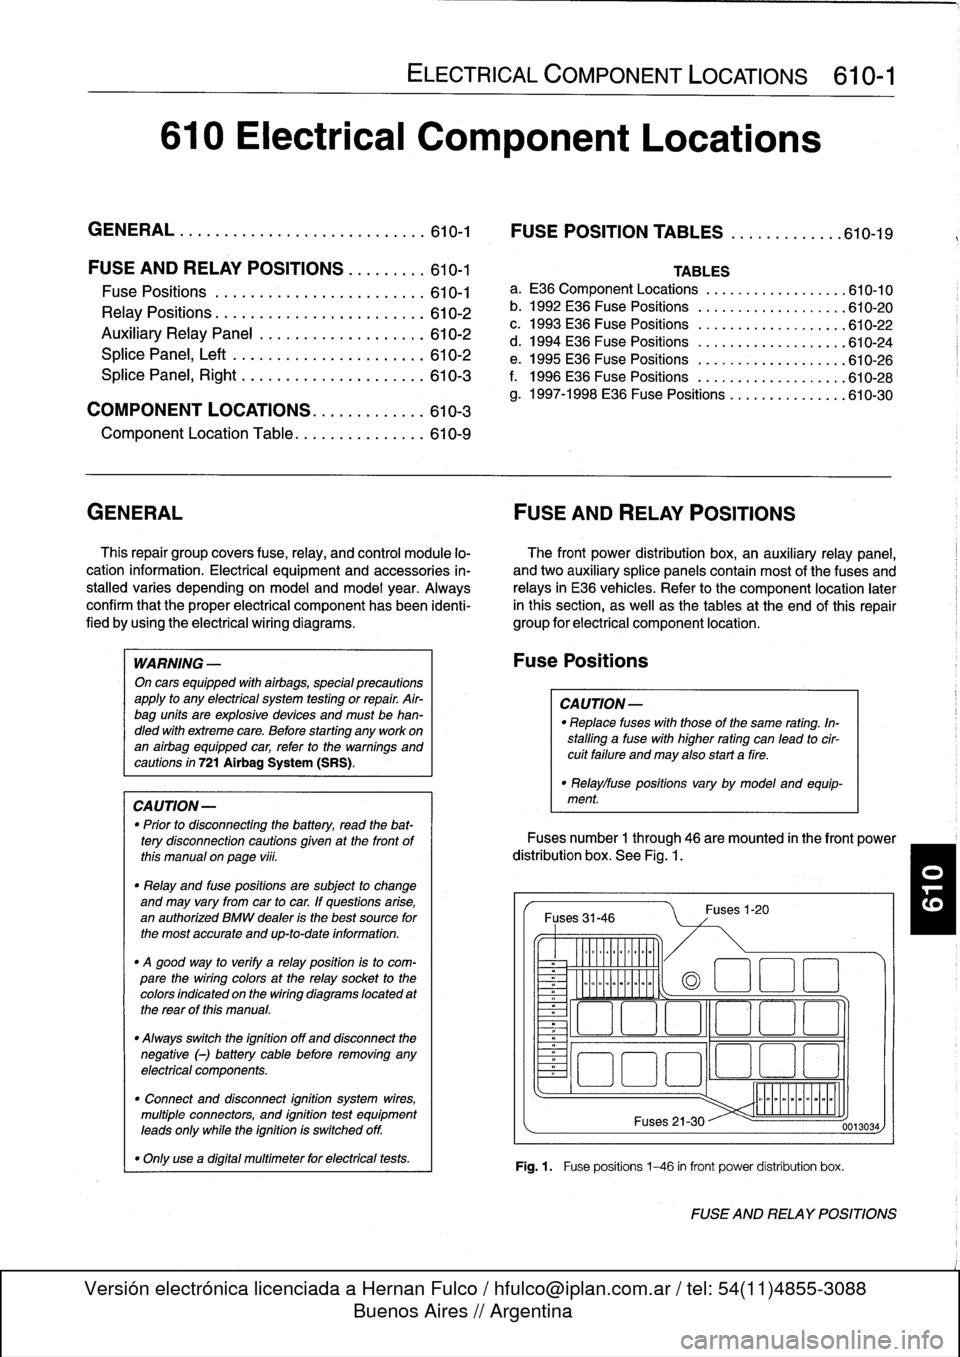 BMW 325i 1992 E36 Workshop Manual 
610
Electrical
Component
Locations

GENERAL
...........
.
.
.
.
.
.
.
.
.
........
610-1

	

FOSE
POSITION
TABLES
..
.
.
.
.
.
.....
.
610-19

FUSE
AND
RELAY
POSITIONS
.
...
.
.
.
.
.
610-1

Fuse
Pos